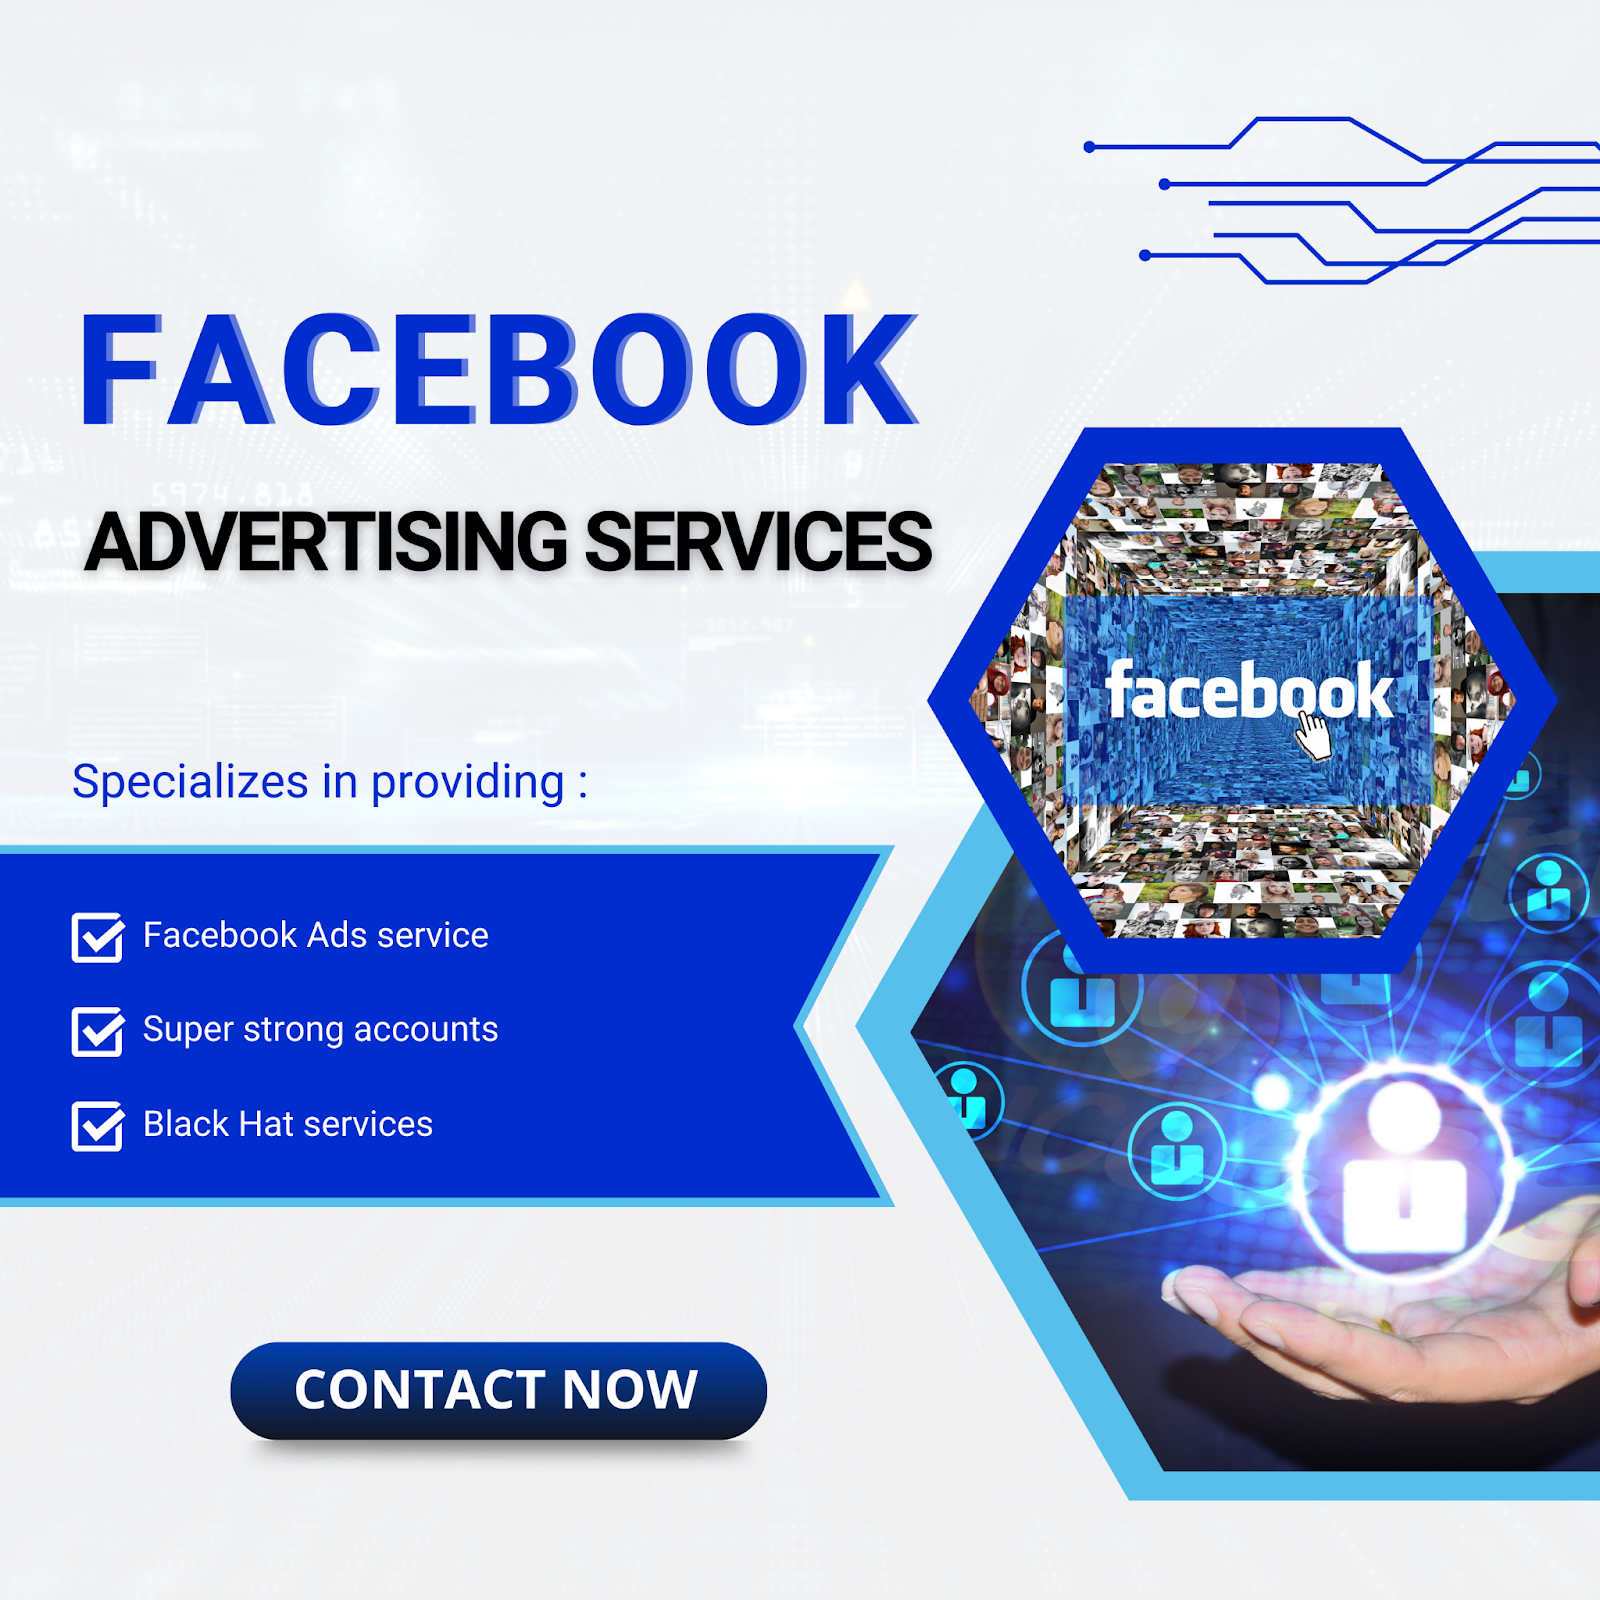 Facebook Ads - Open the door success for your business